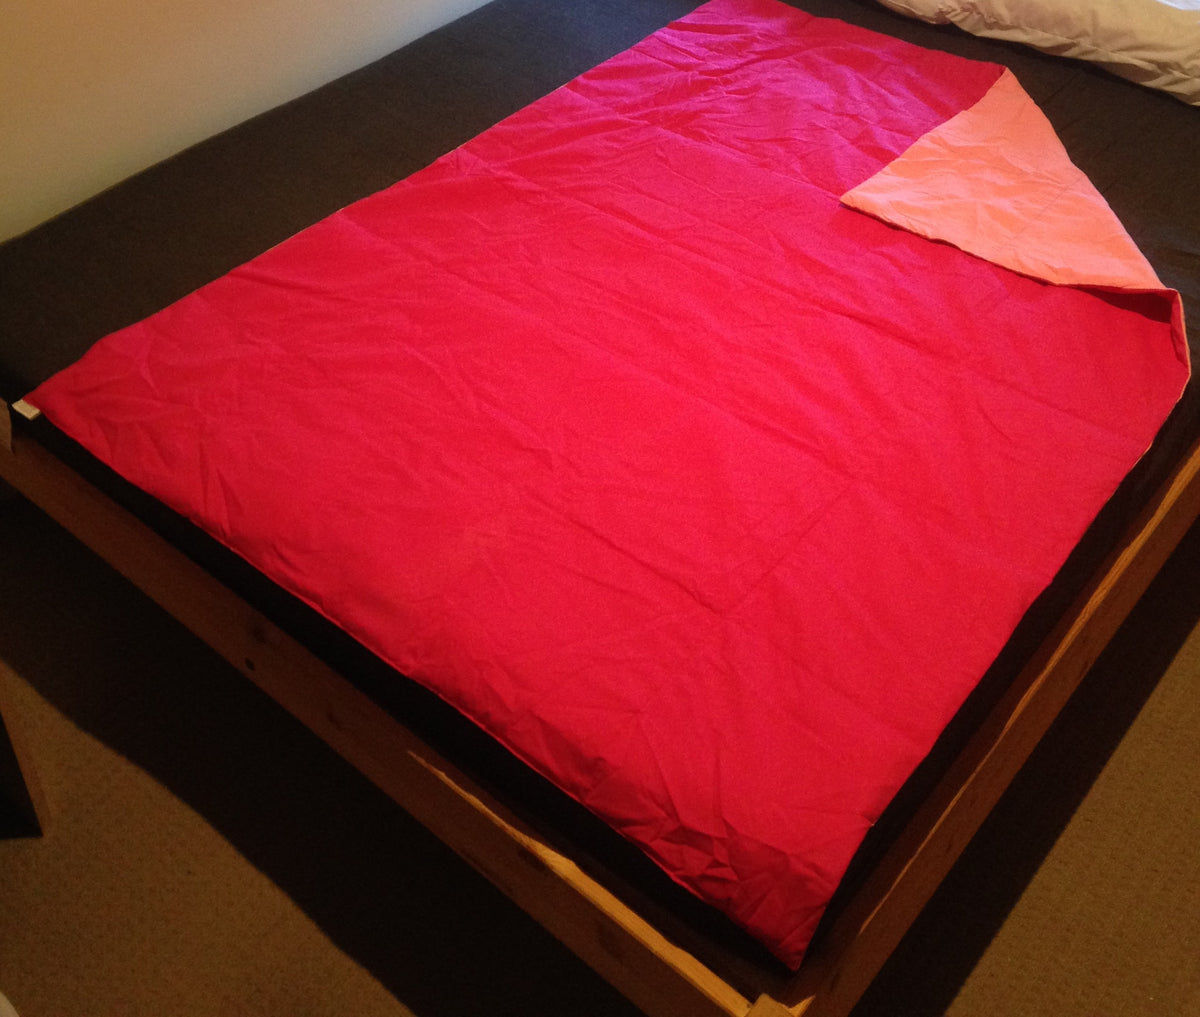 Weighted Blanket - Single bed size (pink on pink)